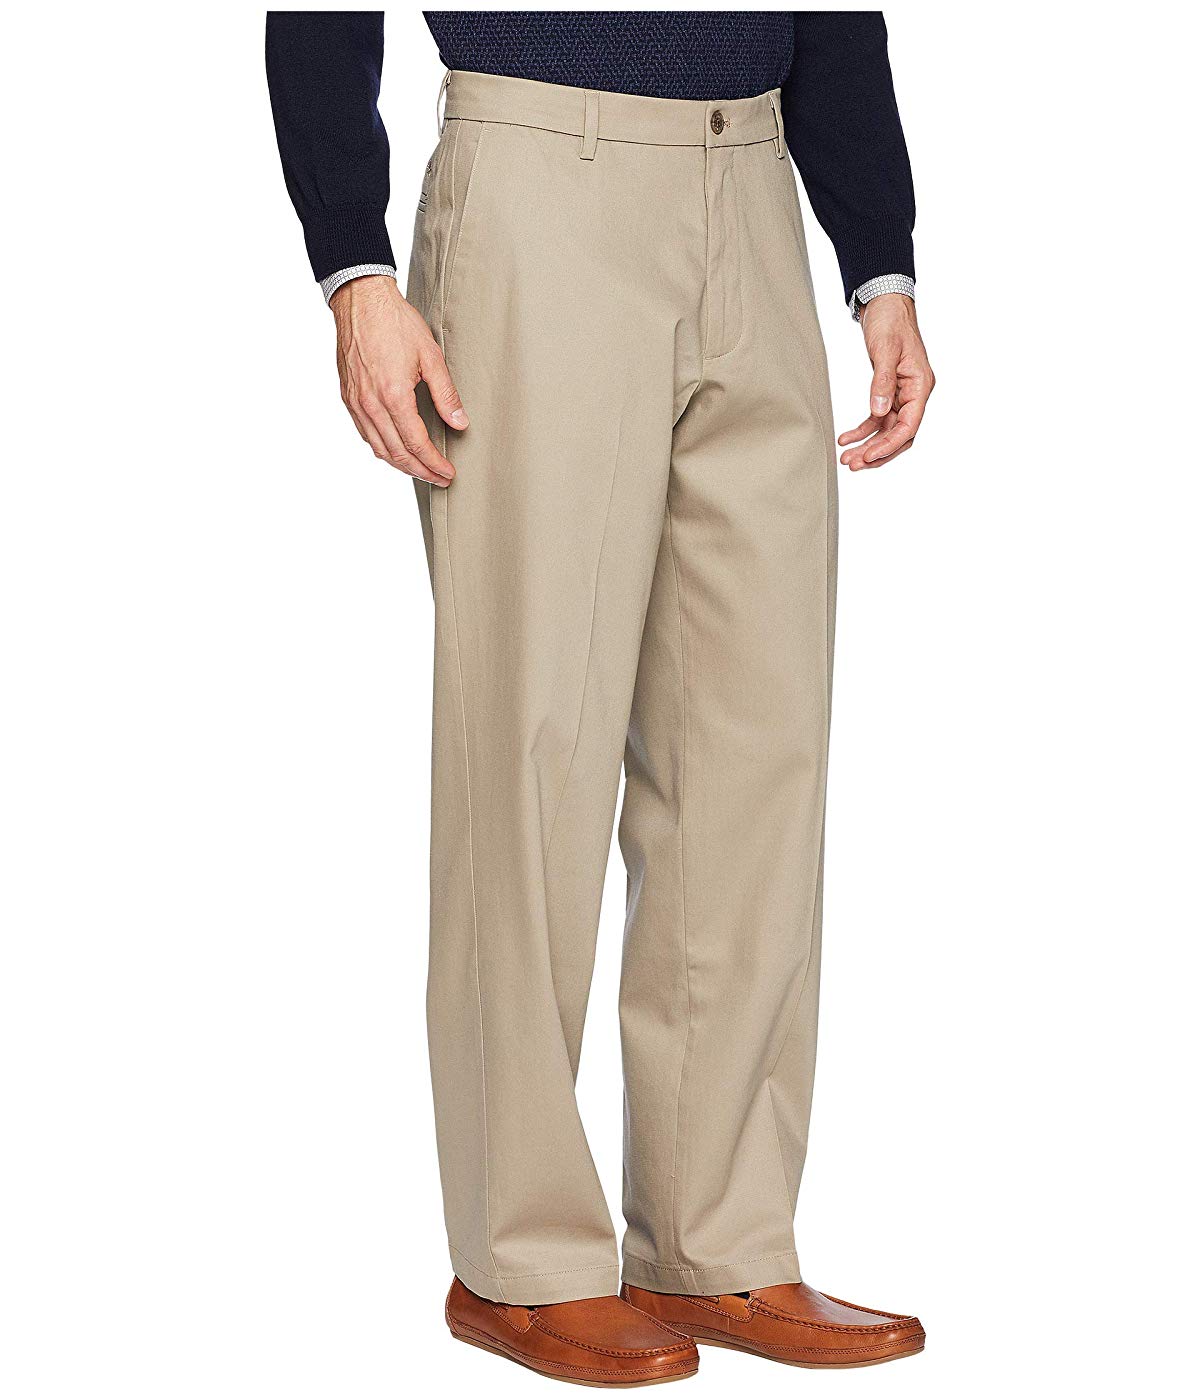 Dockers Men's Relaxed Fit Signature Khaki Lux Cotton Stretch Pants - image 2 of 3